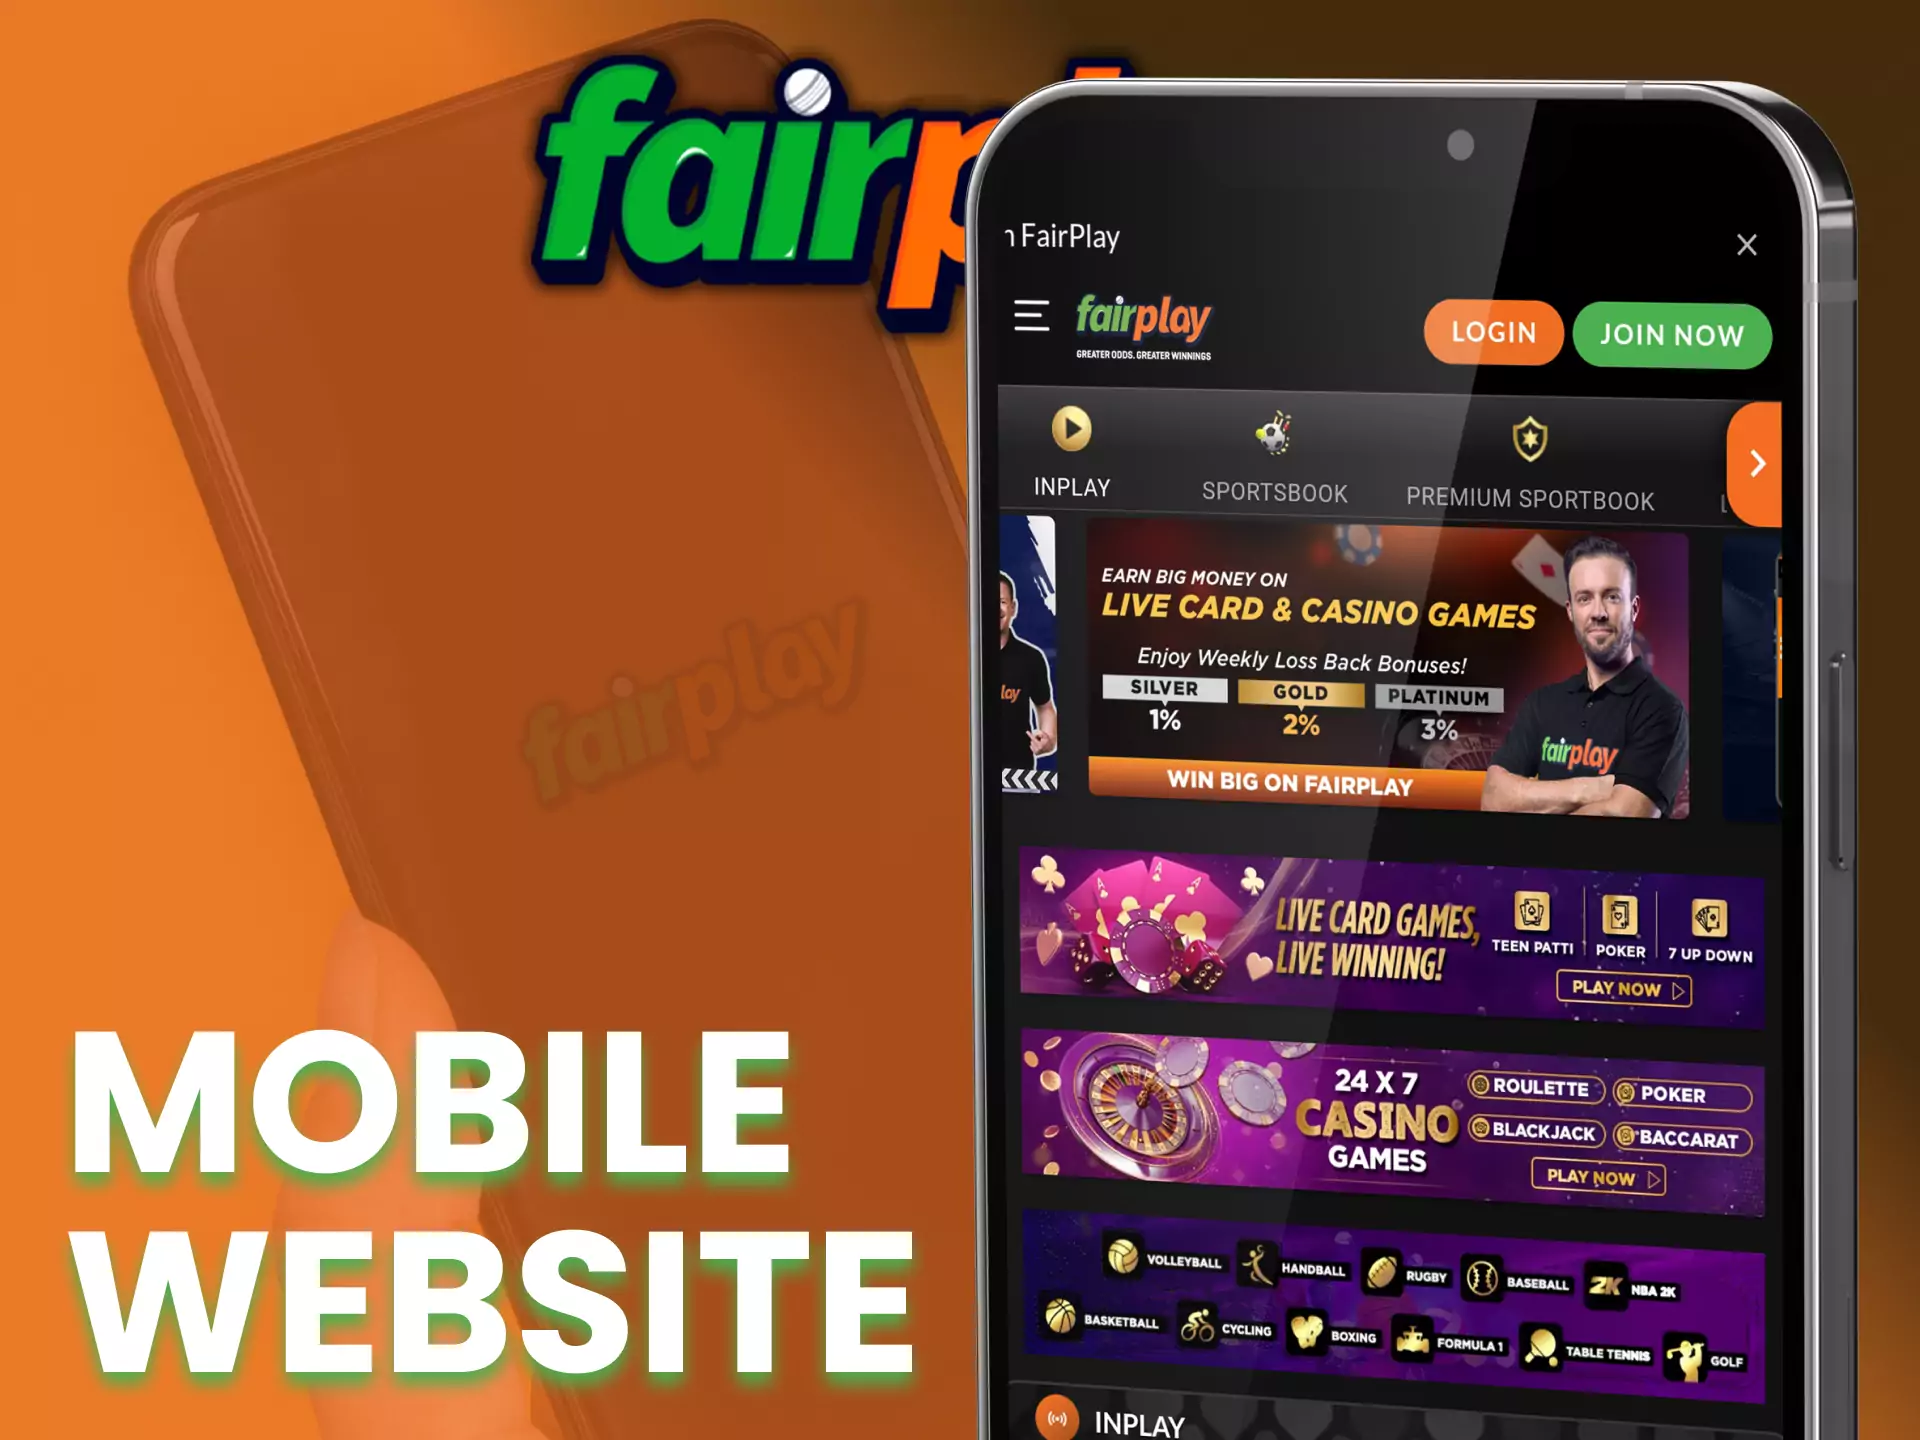 Fairplay has a handy mobile version of the site, for betting and casino games.